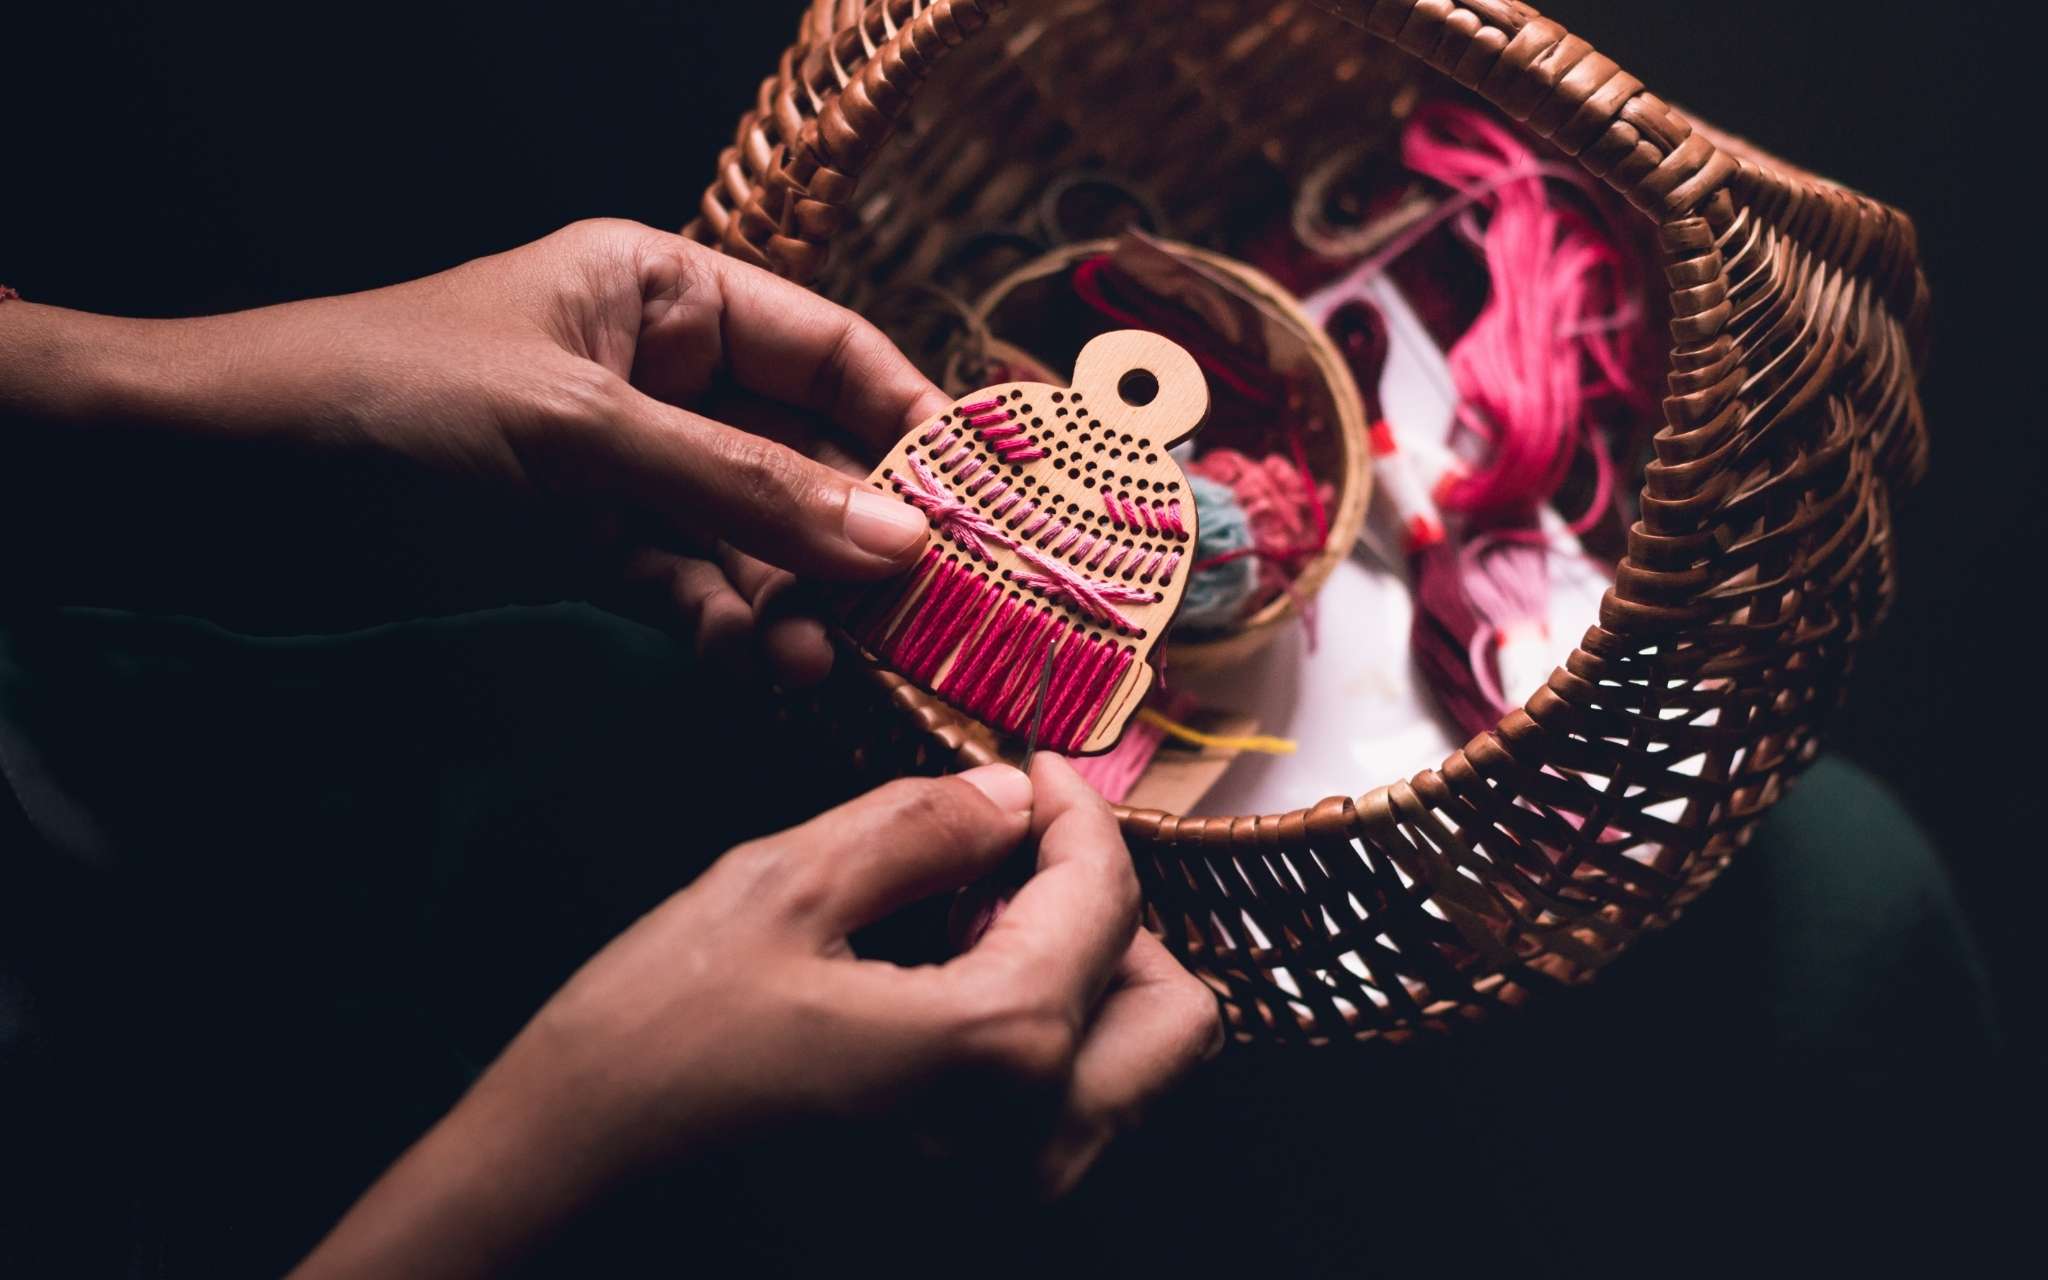 A hat shaped wooden tree ornament is held in hands as it's stitched with brightly coloured threads.